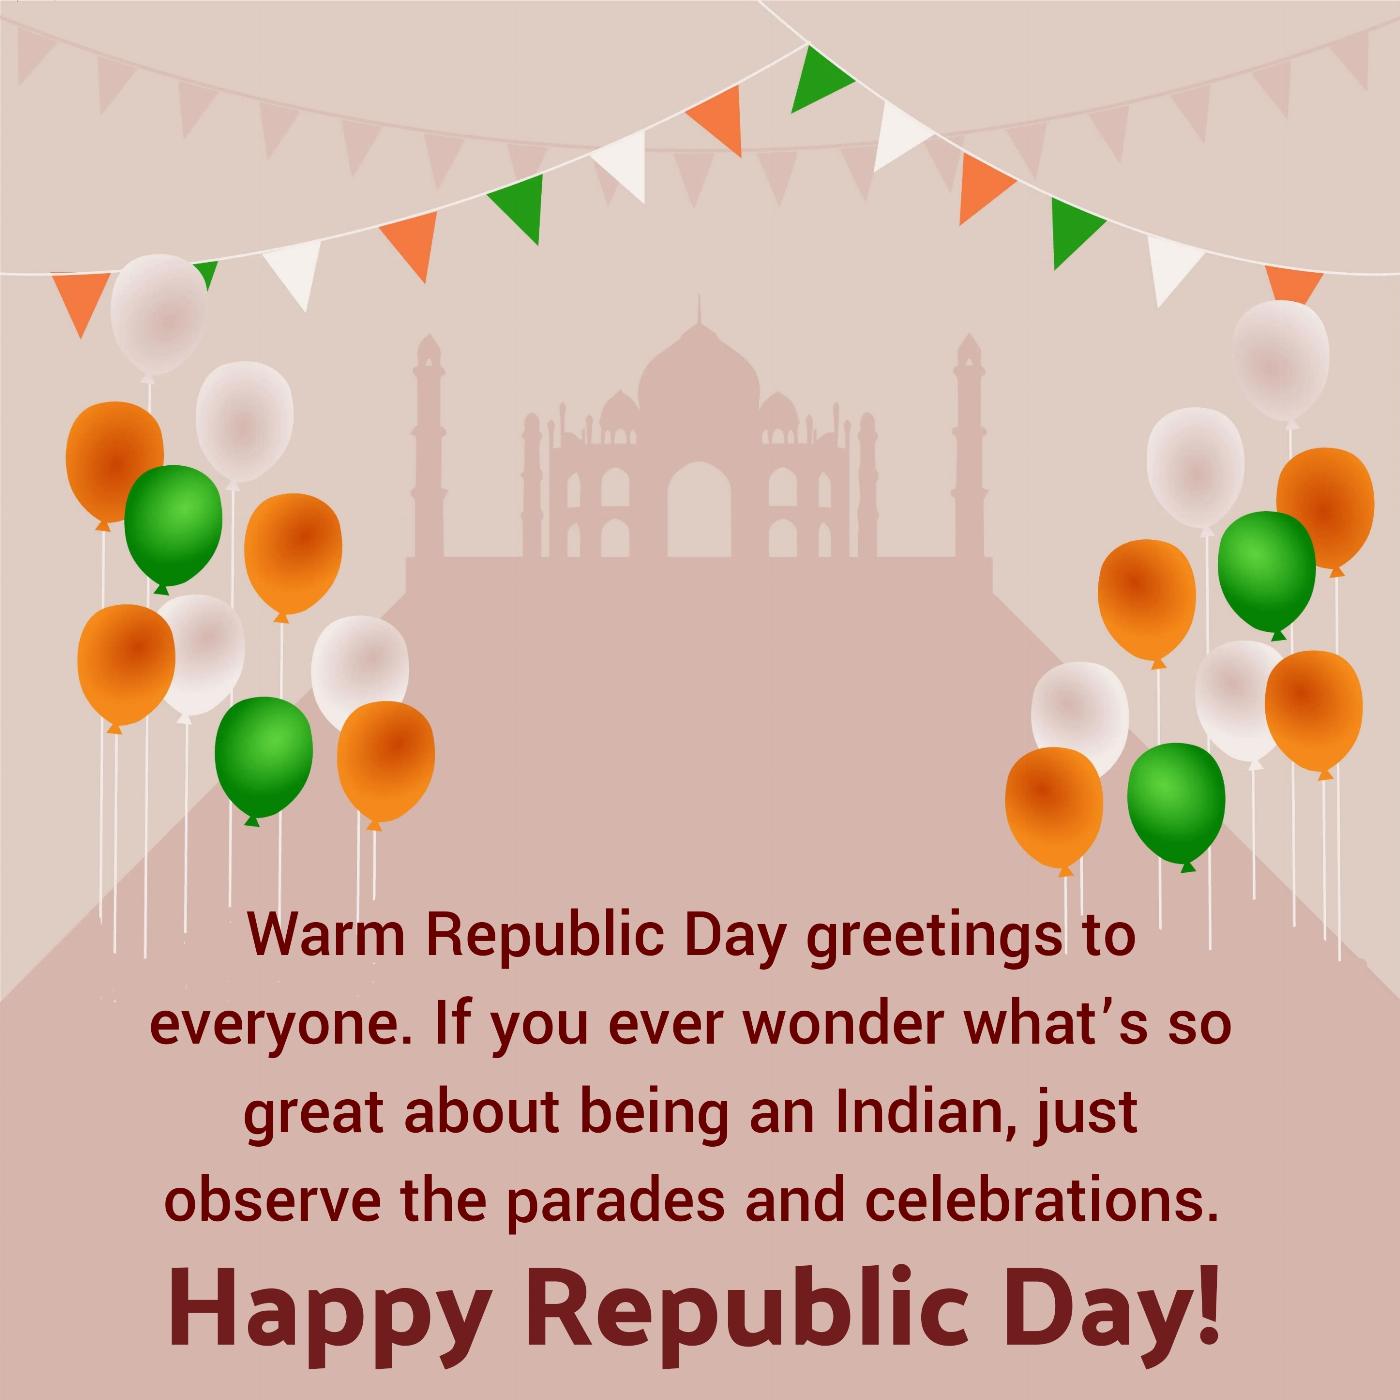 Warm Republic Day greetings to everyone